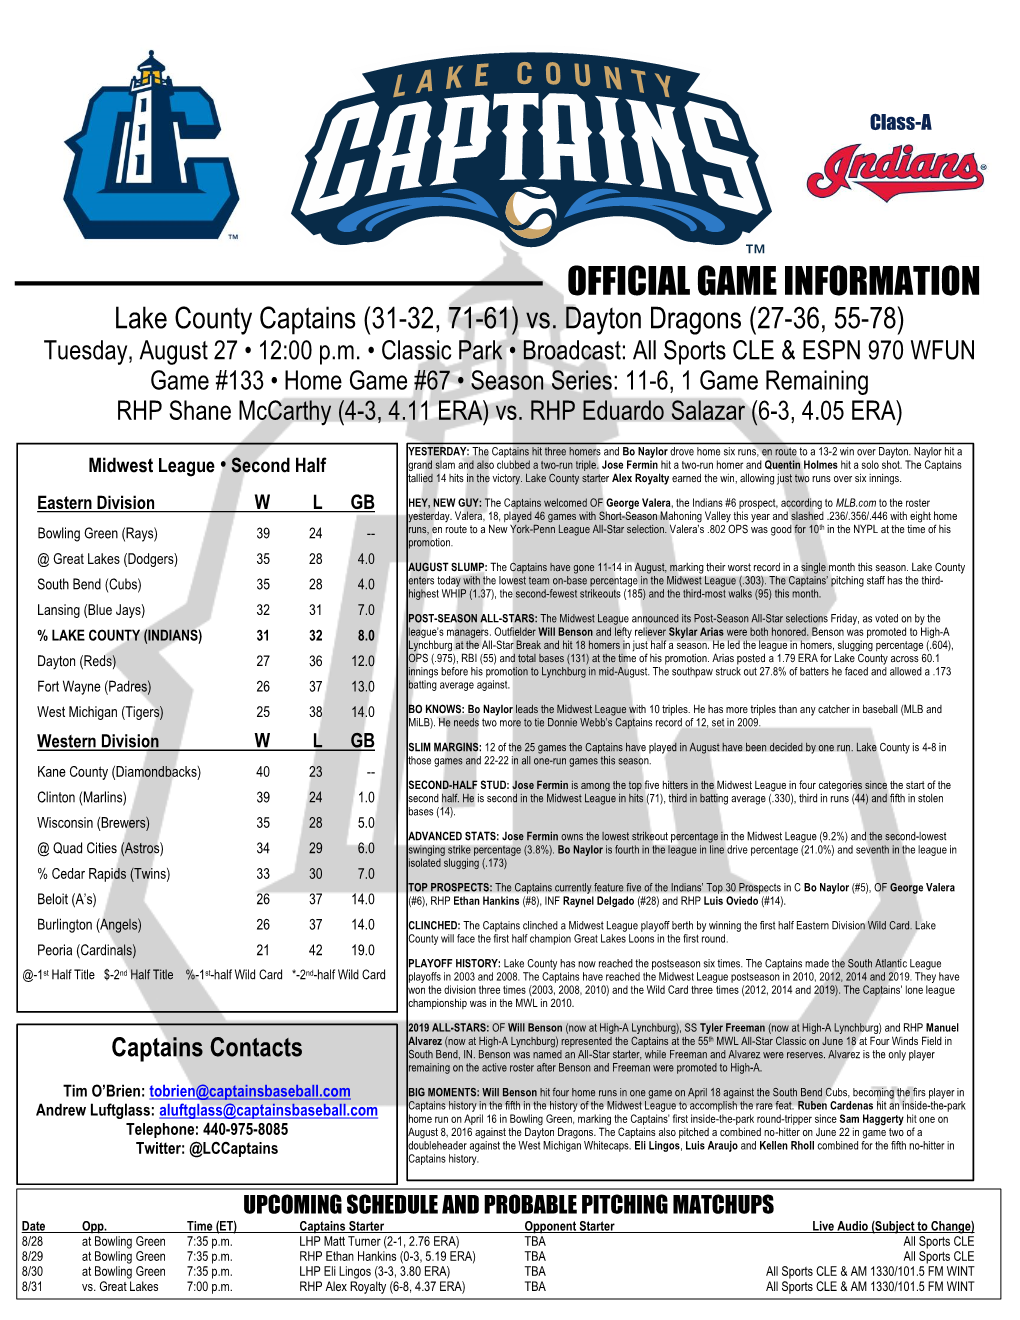 OFFICIAL GAME INFORMATION Lake County Captains (31-32, 71-61) Vs